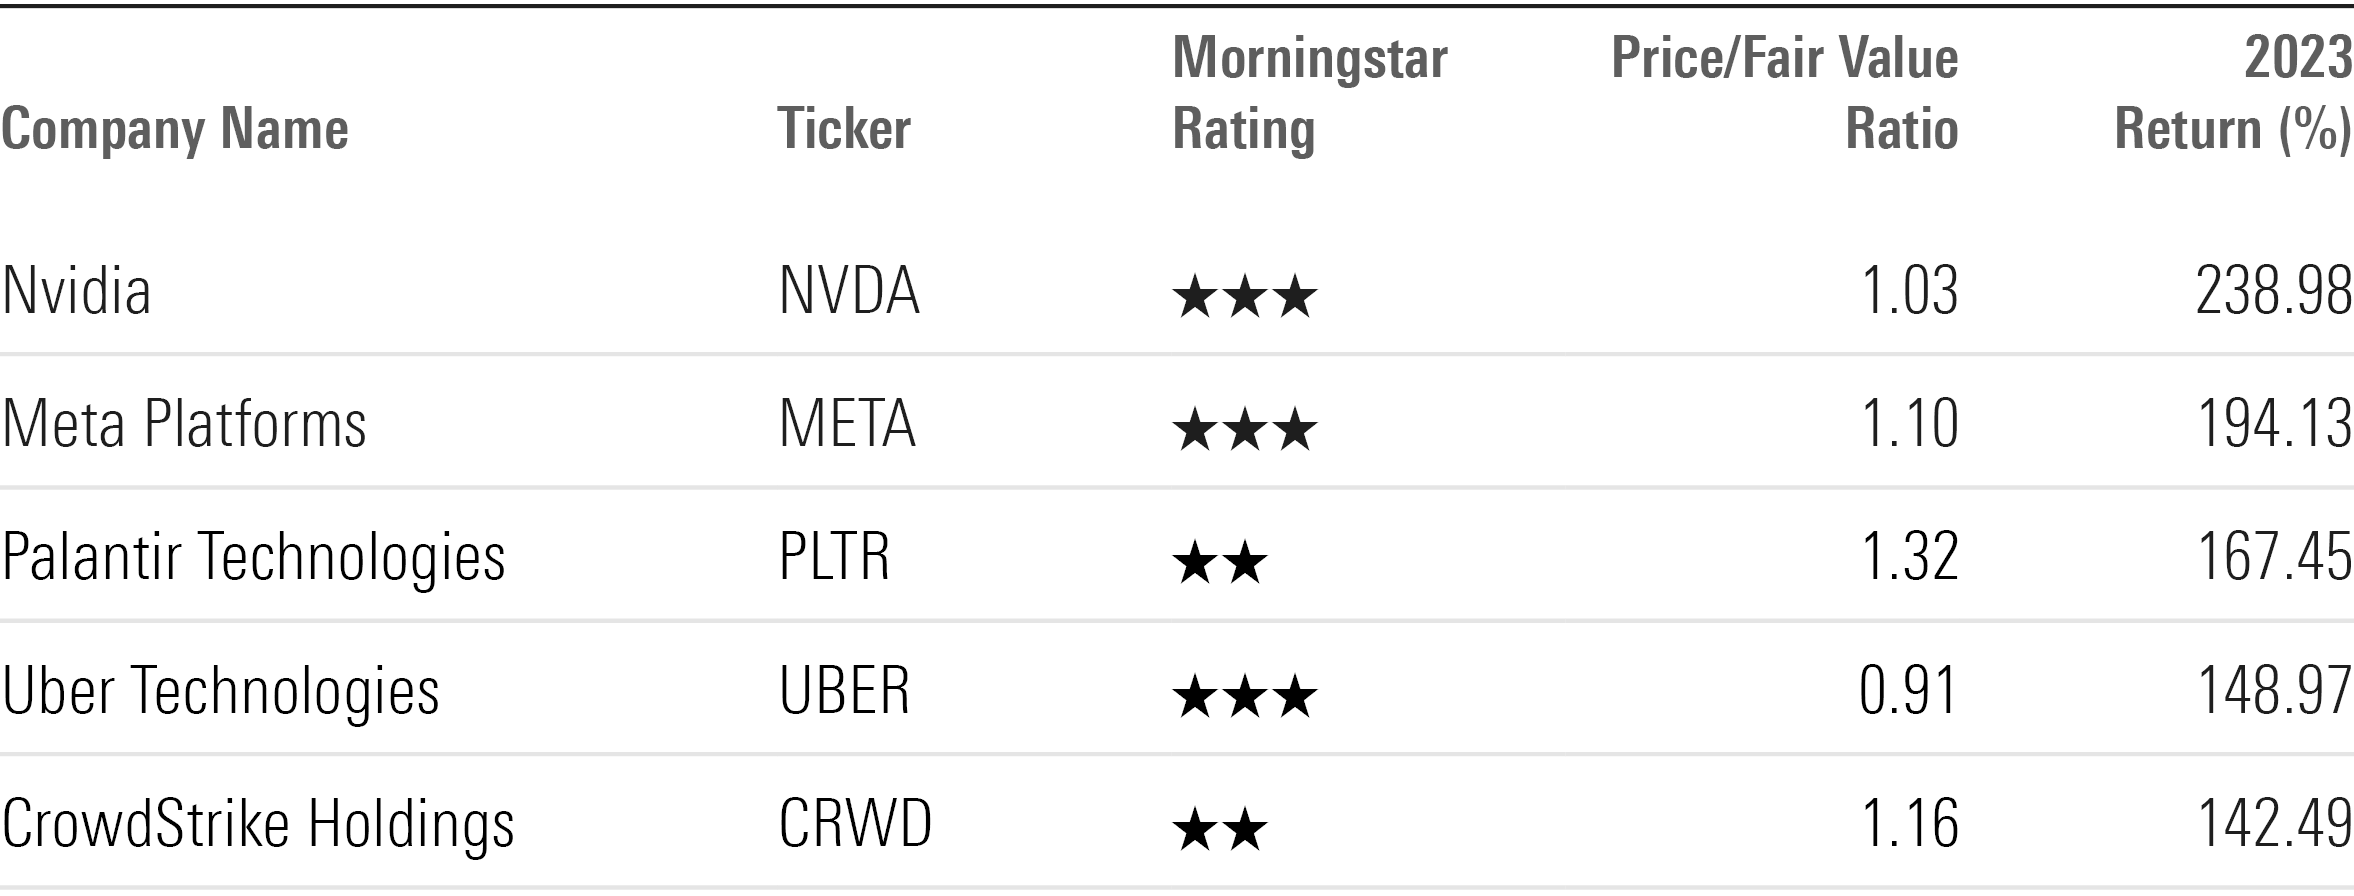 Table showing ticker, Morningstar Rating, price/fair value ratio, and return for the top-performing moat stocks of 2023.